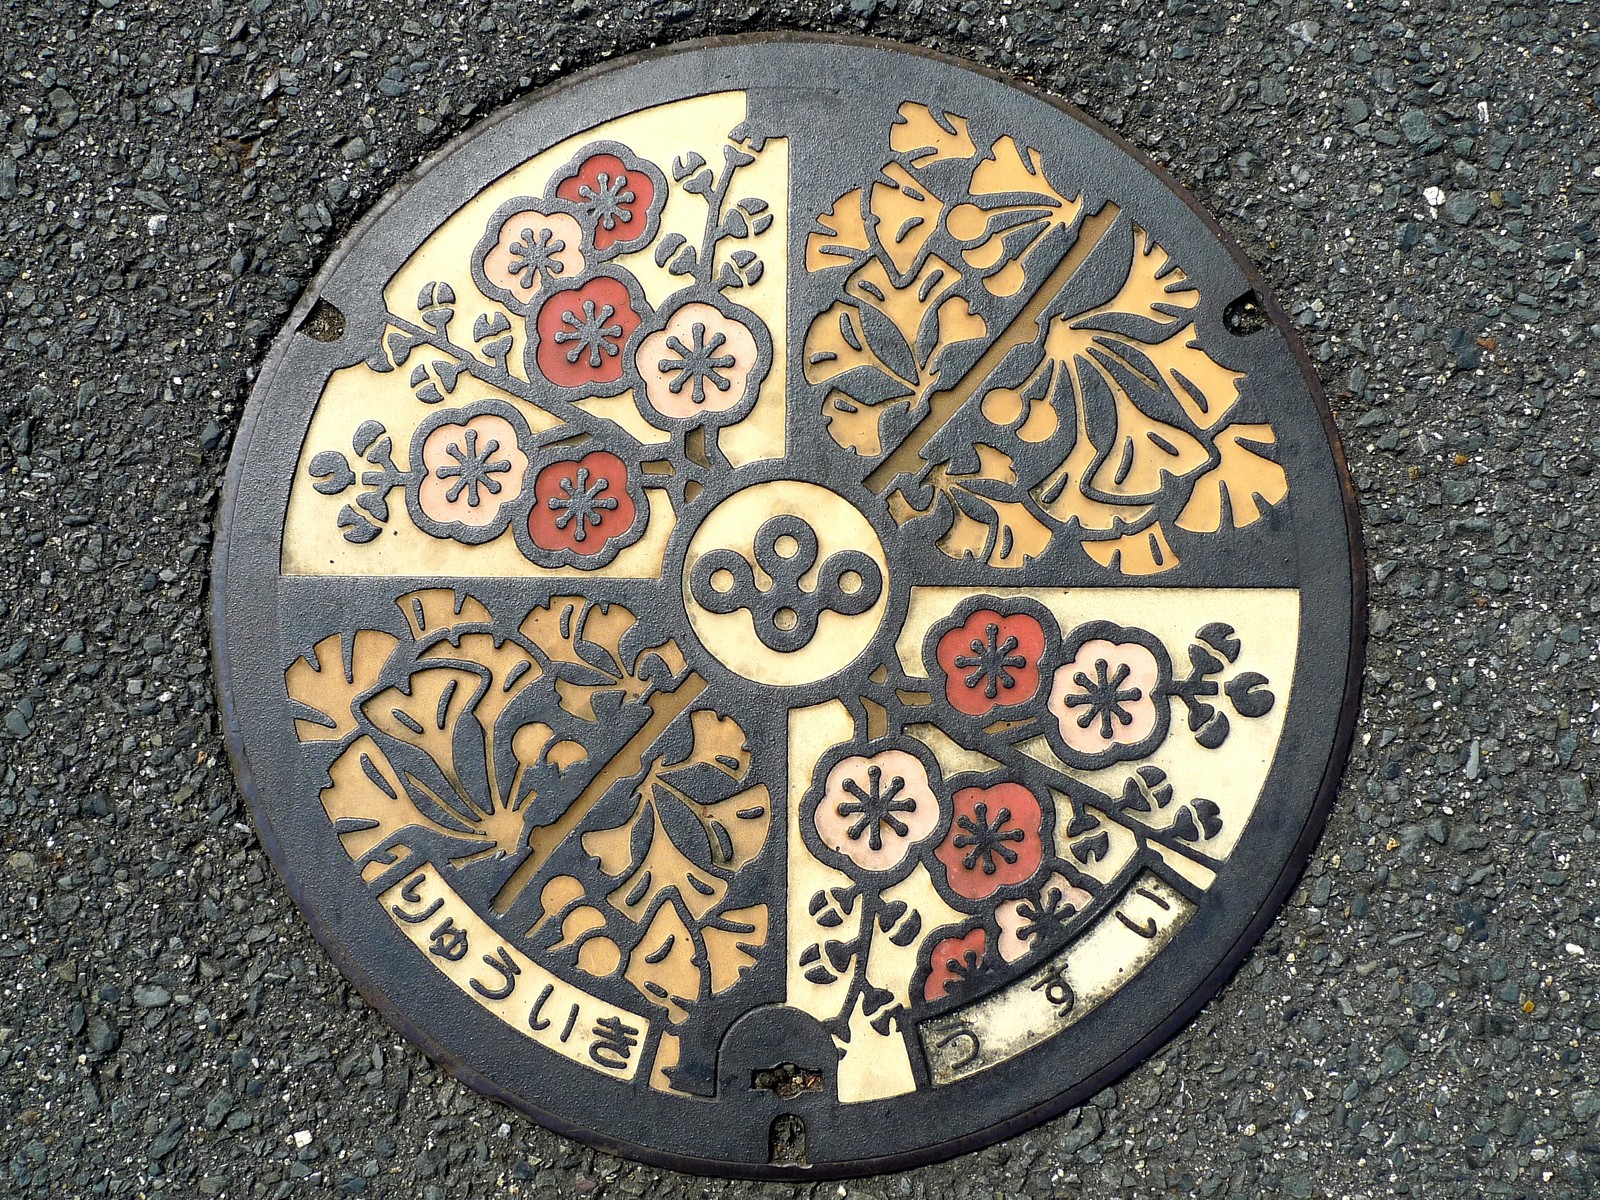 sewer covers arts